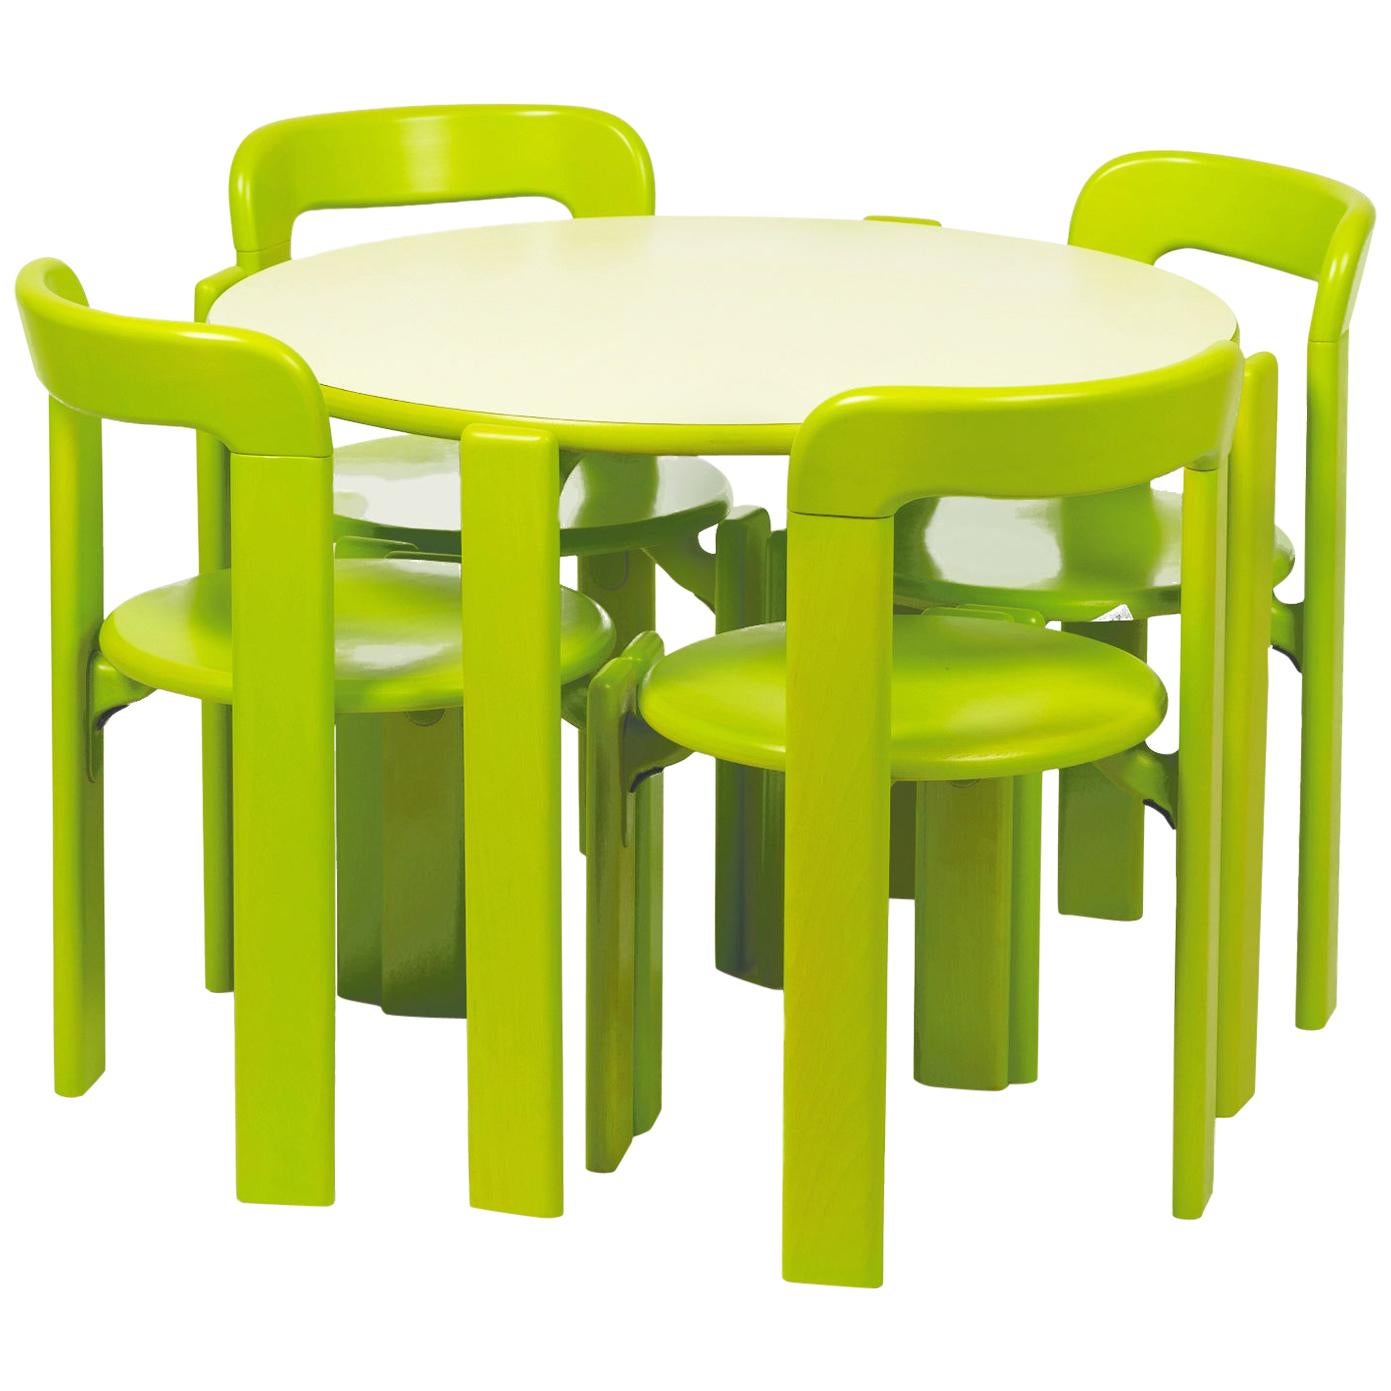 Rey Junior Set, Kids Table and Chairs in Green, Designed by Bruno Rey, in Stock